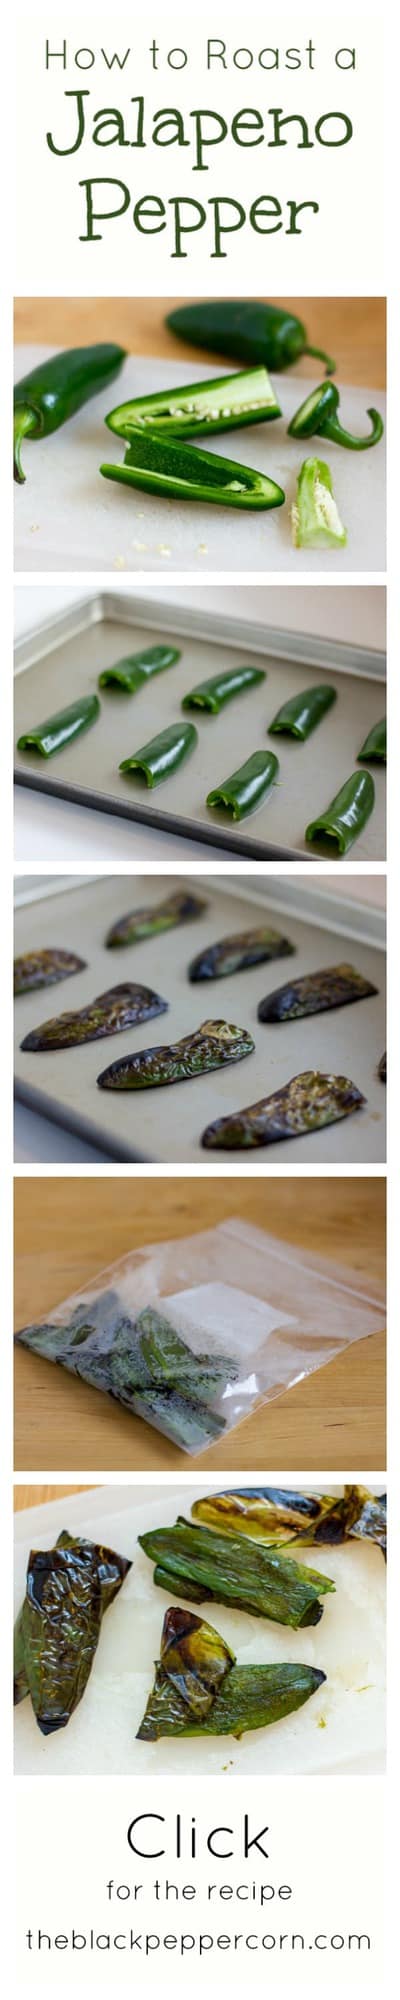 How to roast a jalapeño pepper in the oven